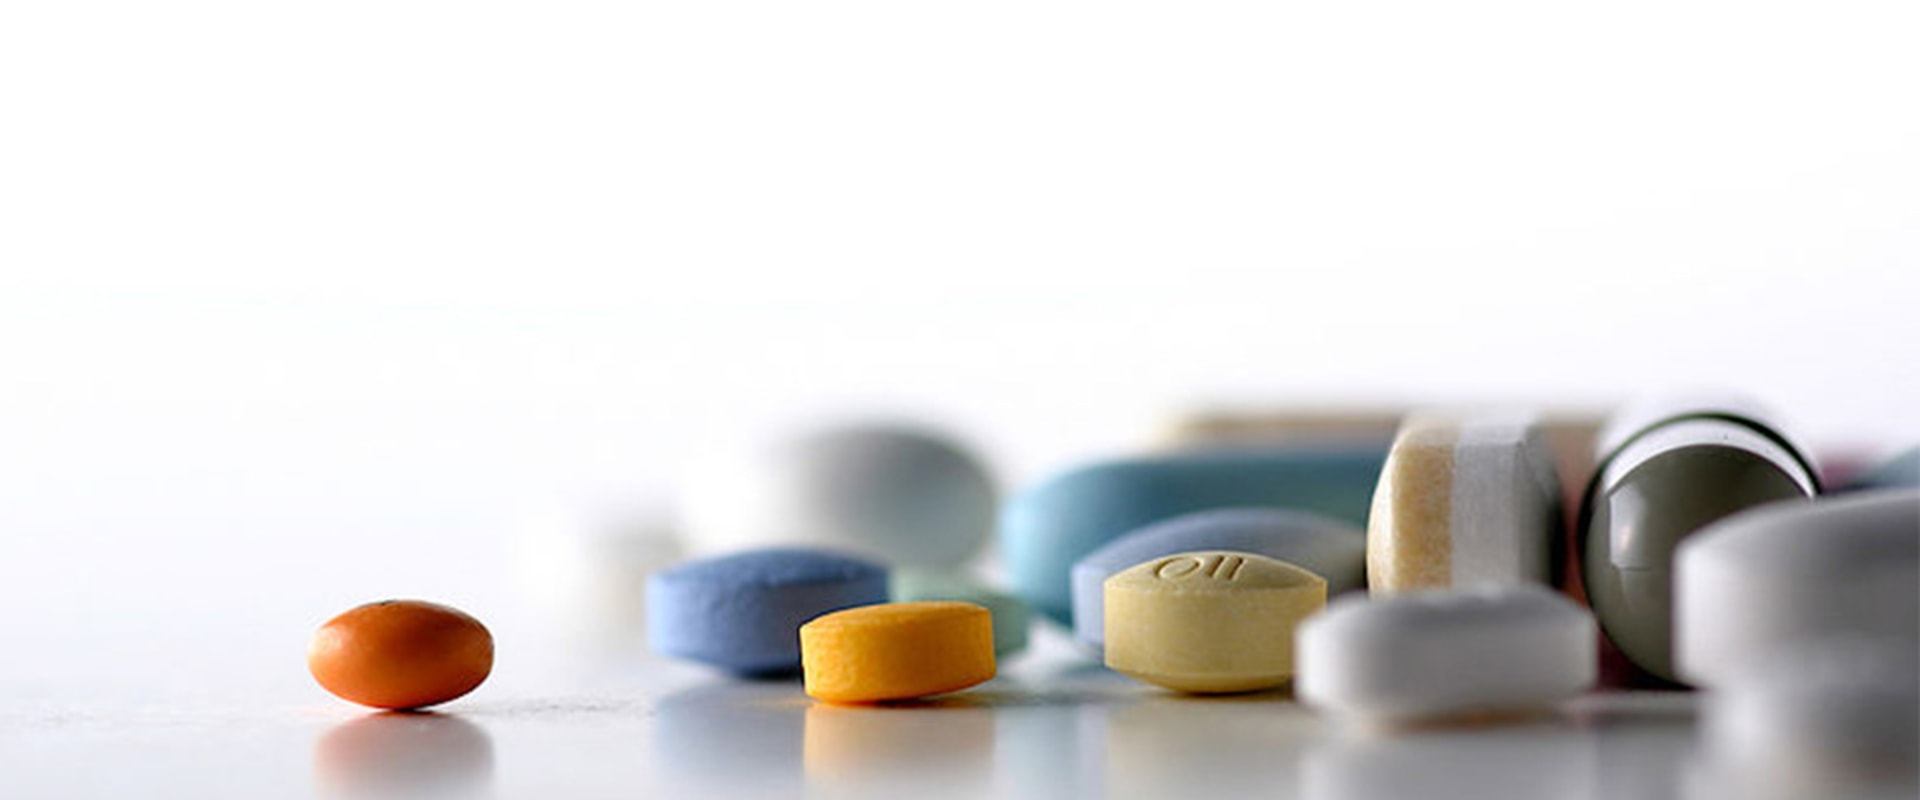 What is the market for pharmaceutical industry?